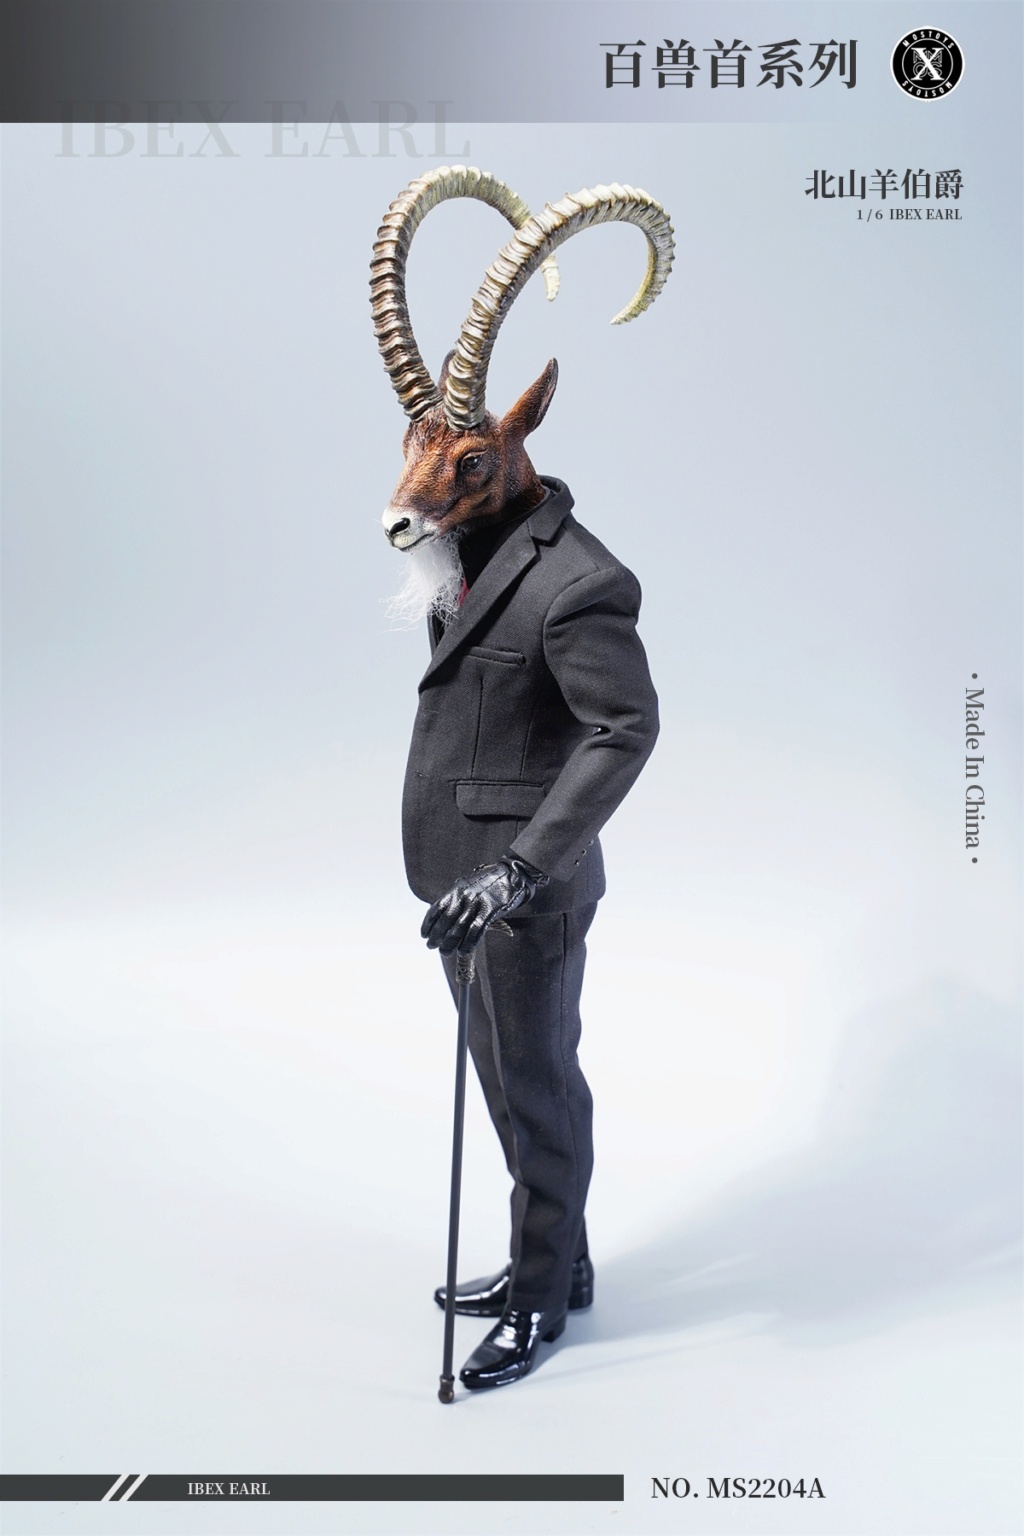 Base - NEW PRODUCT: MosToys: 1/6 Hundred Beast Head Sculpture Series - Ibex Earl action figure with diorama base 16072510